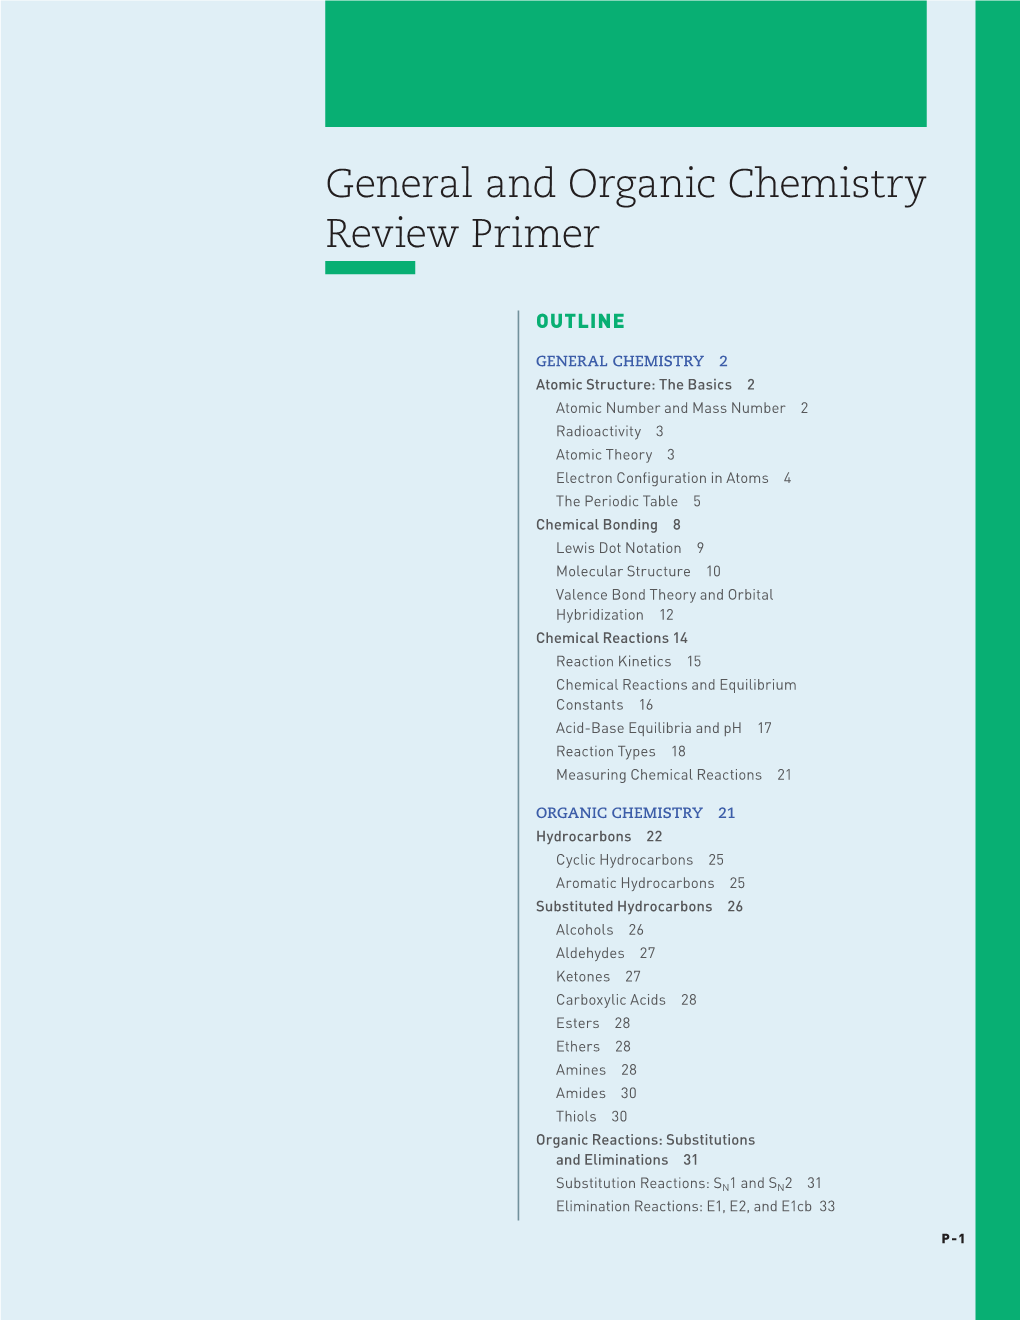 General and Organic Chemistry Review Primer